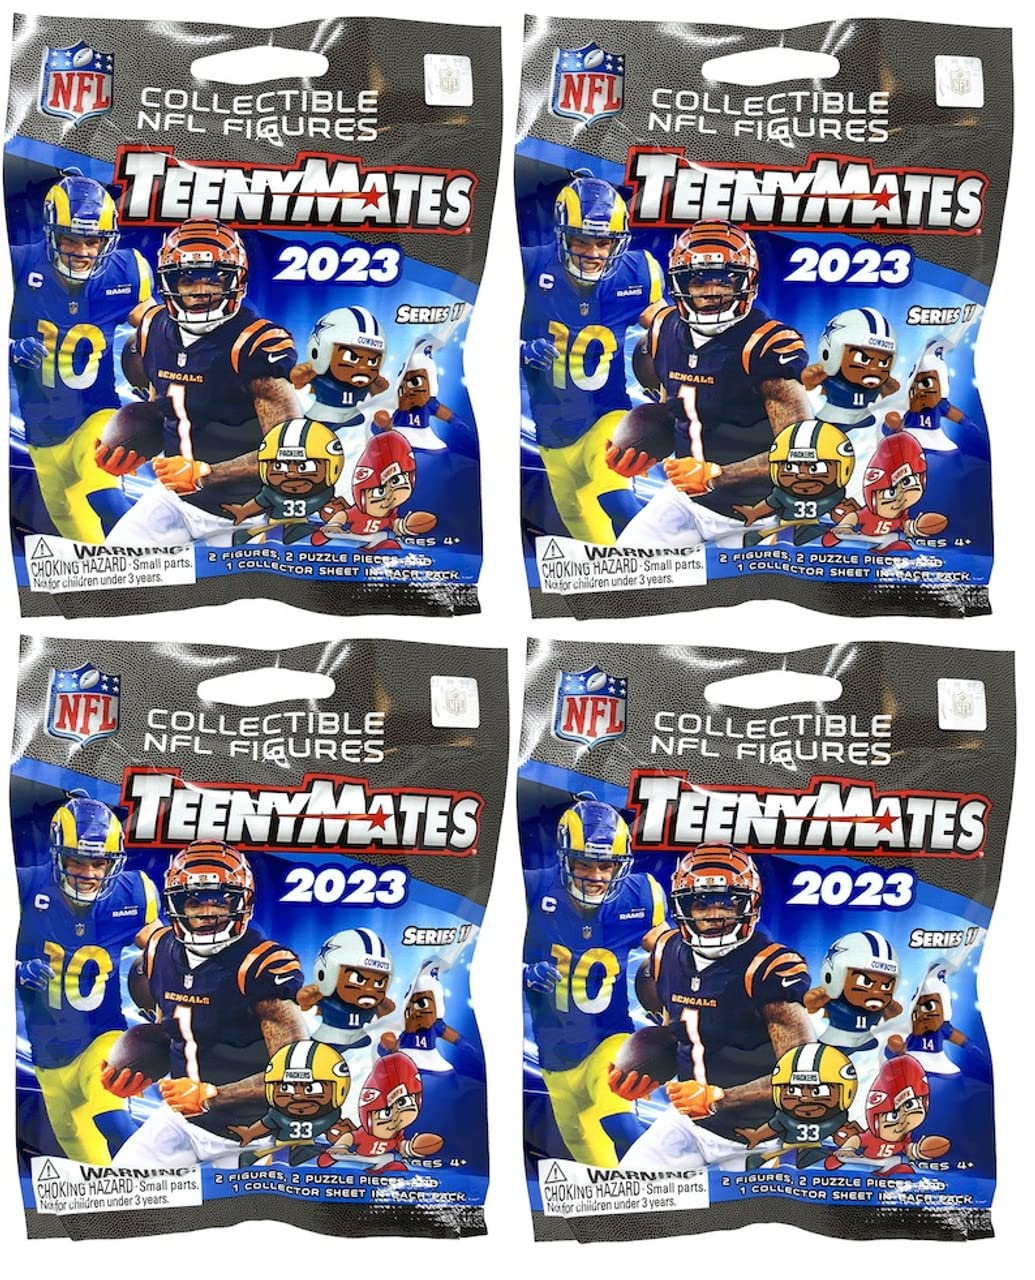 Teenymates Party Animal 2022 / 2023 NFL Football Series 11 Figures Blind Bags Gift Set Party Bundle - 4 Pack, Multicolored